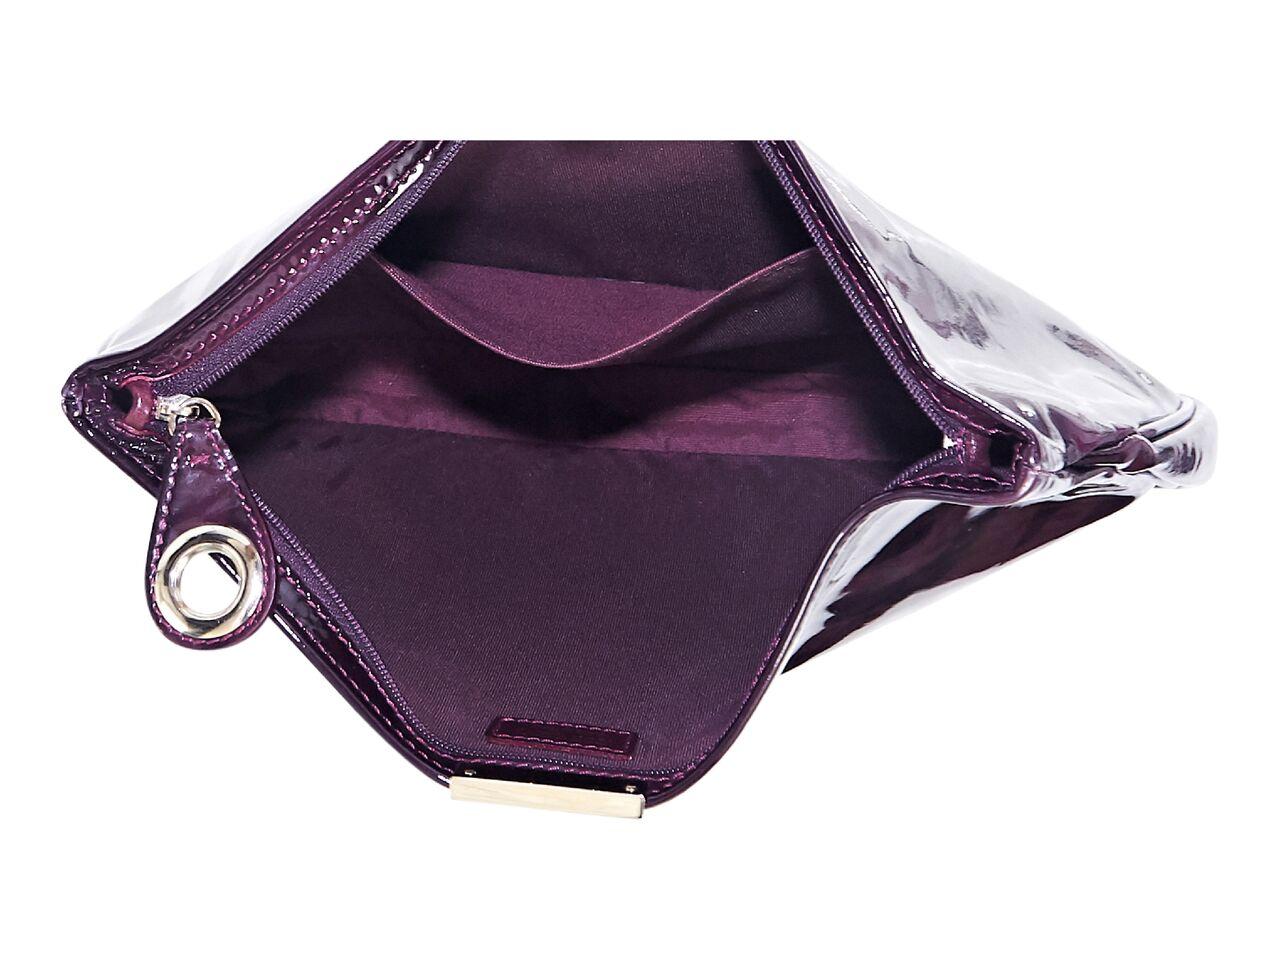 Product details:  Purple and black printed patent leather clutch by Jimmy Choo.  Top zip closure.  Lined interior with inner slide pocket.  Goldtone hardware.  12